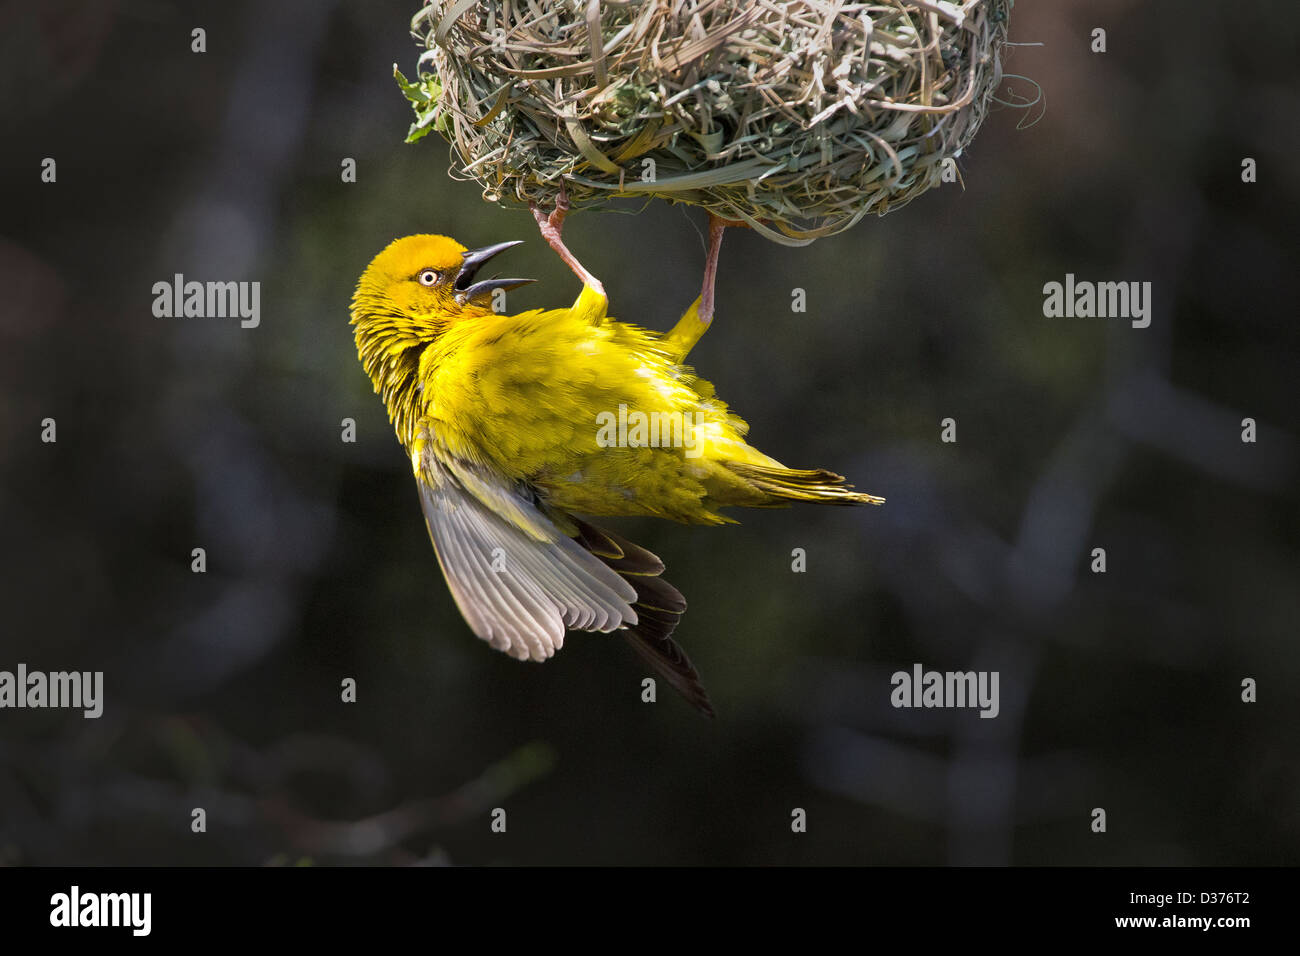 Southern Musked Weaver building nest Stock Photo